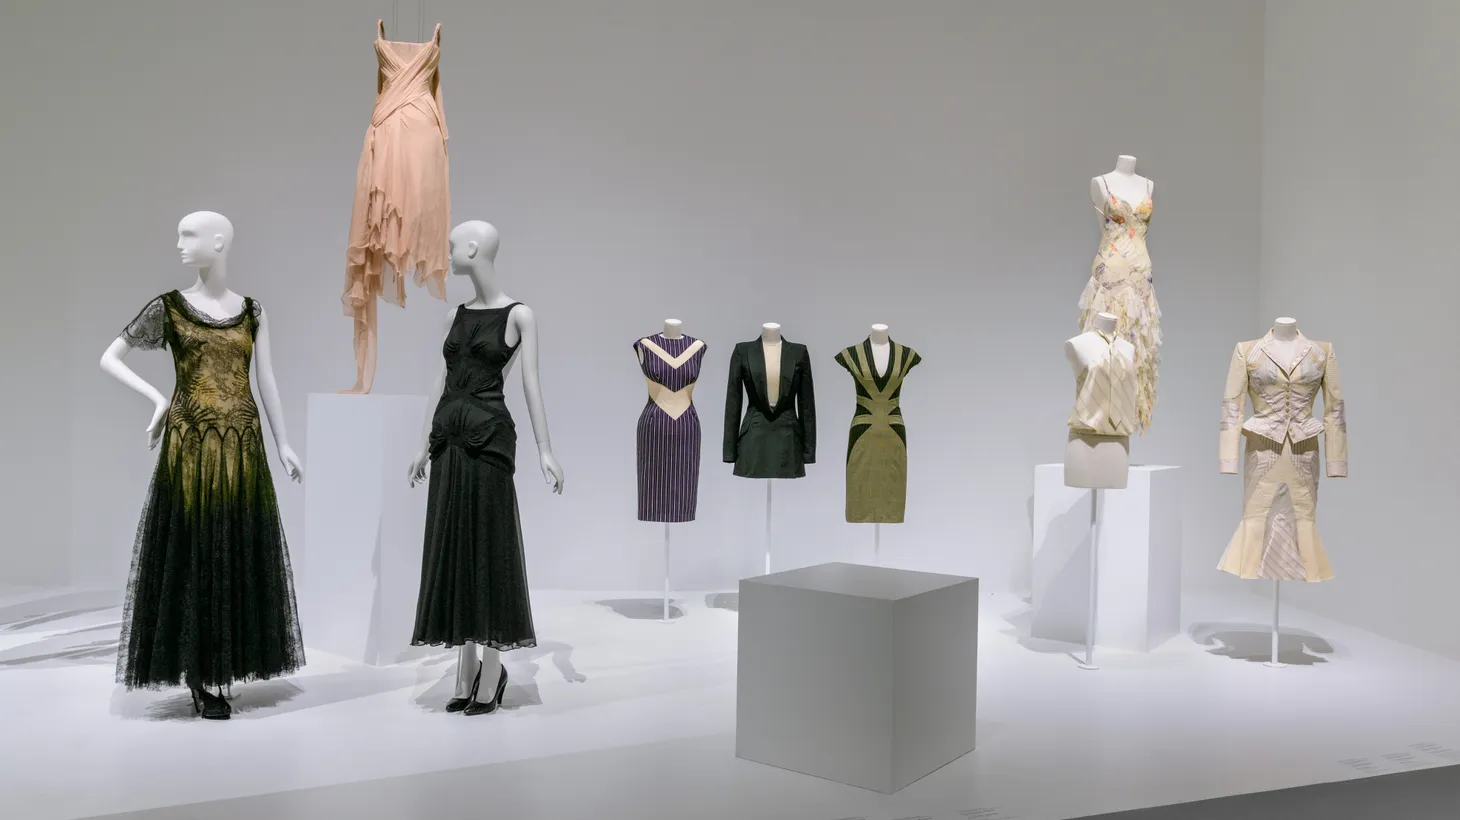 “You really get a sense of how McQueen was deeply influenced by historical narratives and visual culture,” says Lindsay Preston Zappas, founder and editor-in-chief of Contemporary Art Review Los Angeles.